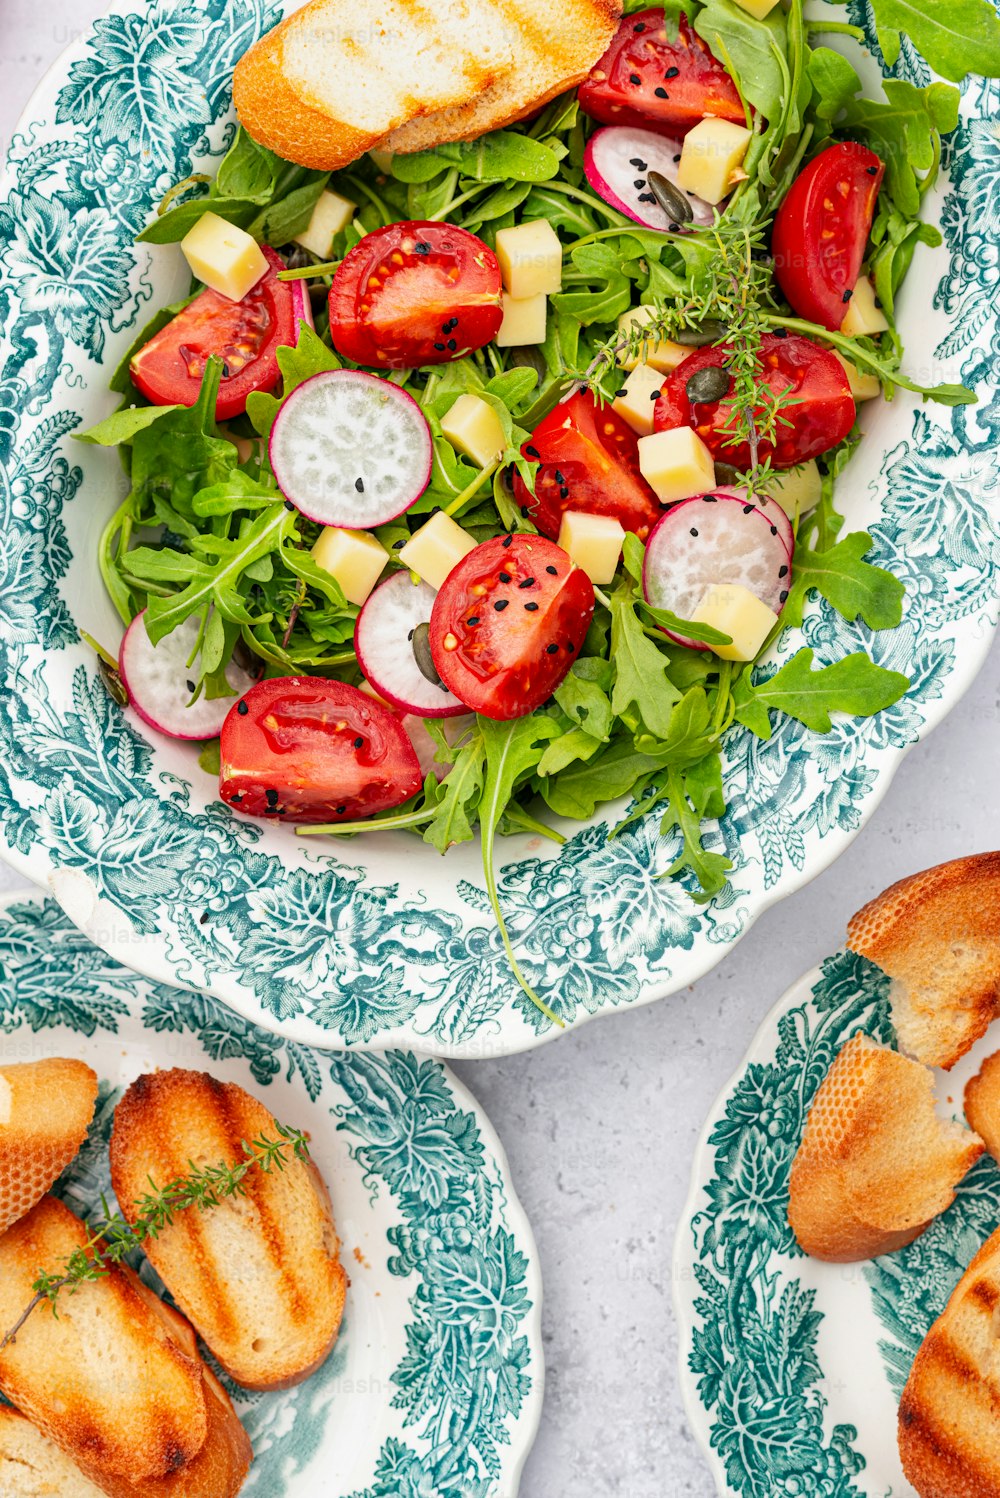 a salad with tomatoes, cucumbers, cheese and bread